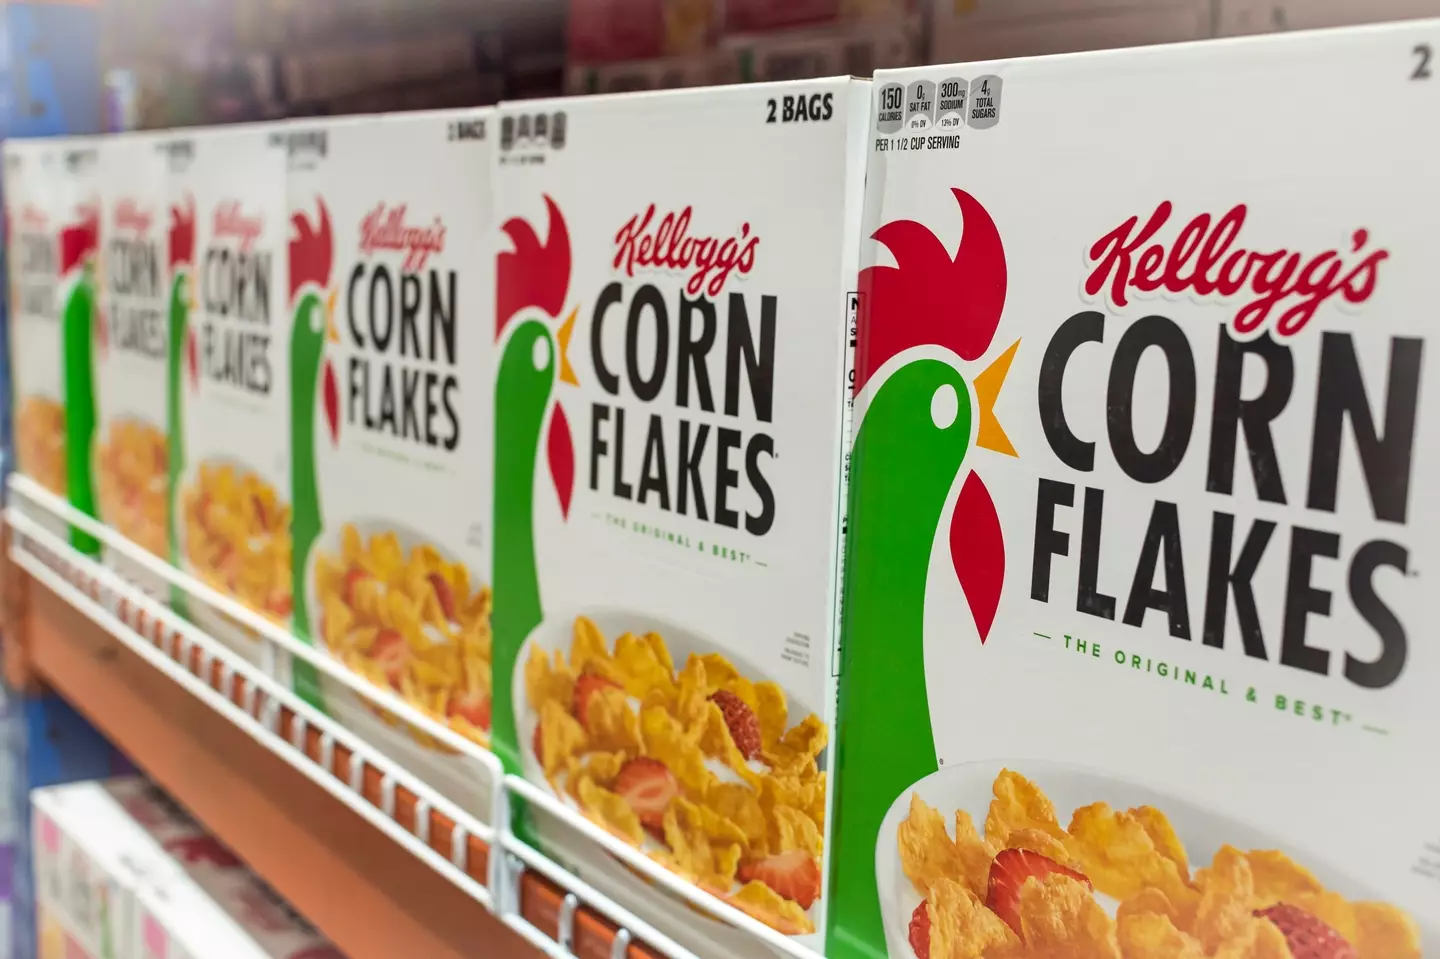 Kellogg's is following in the footsteps of a number of other companies (